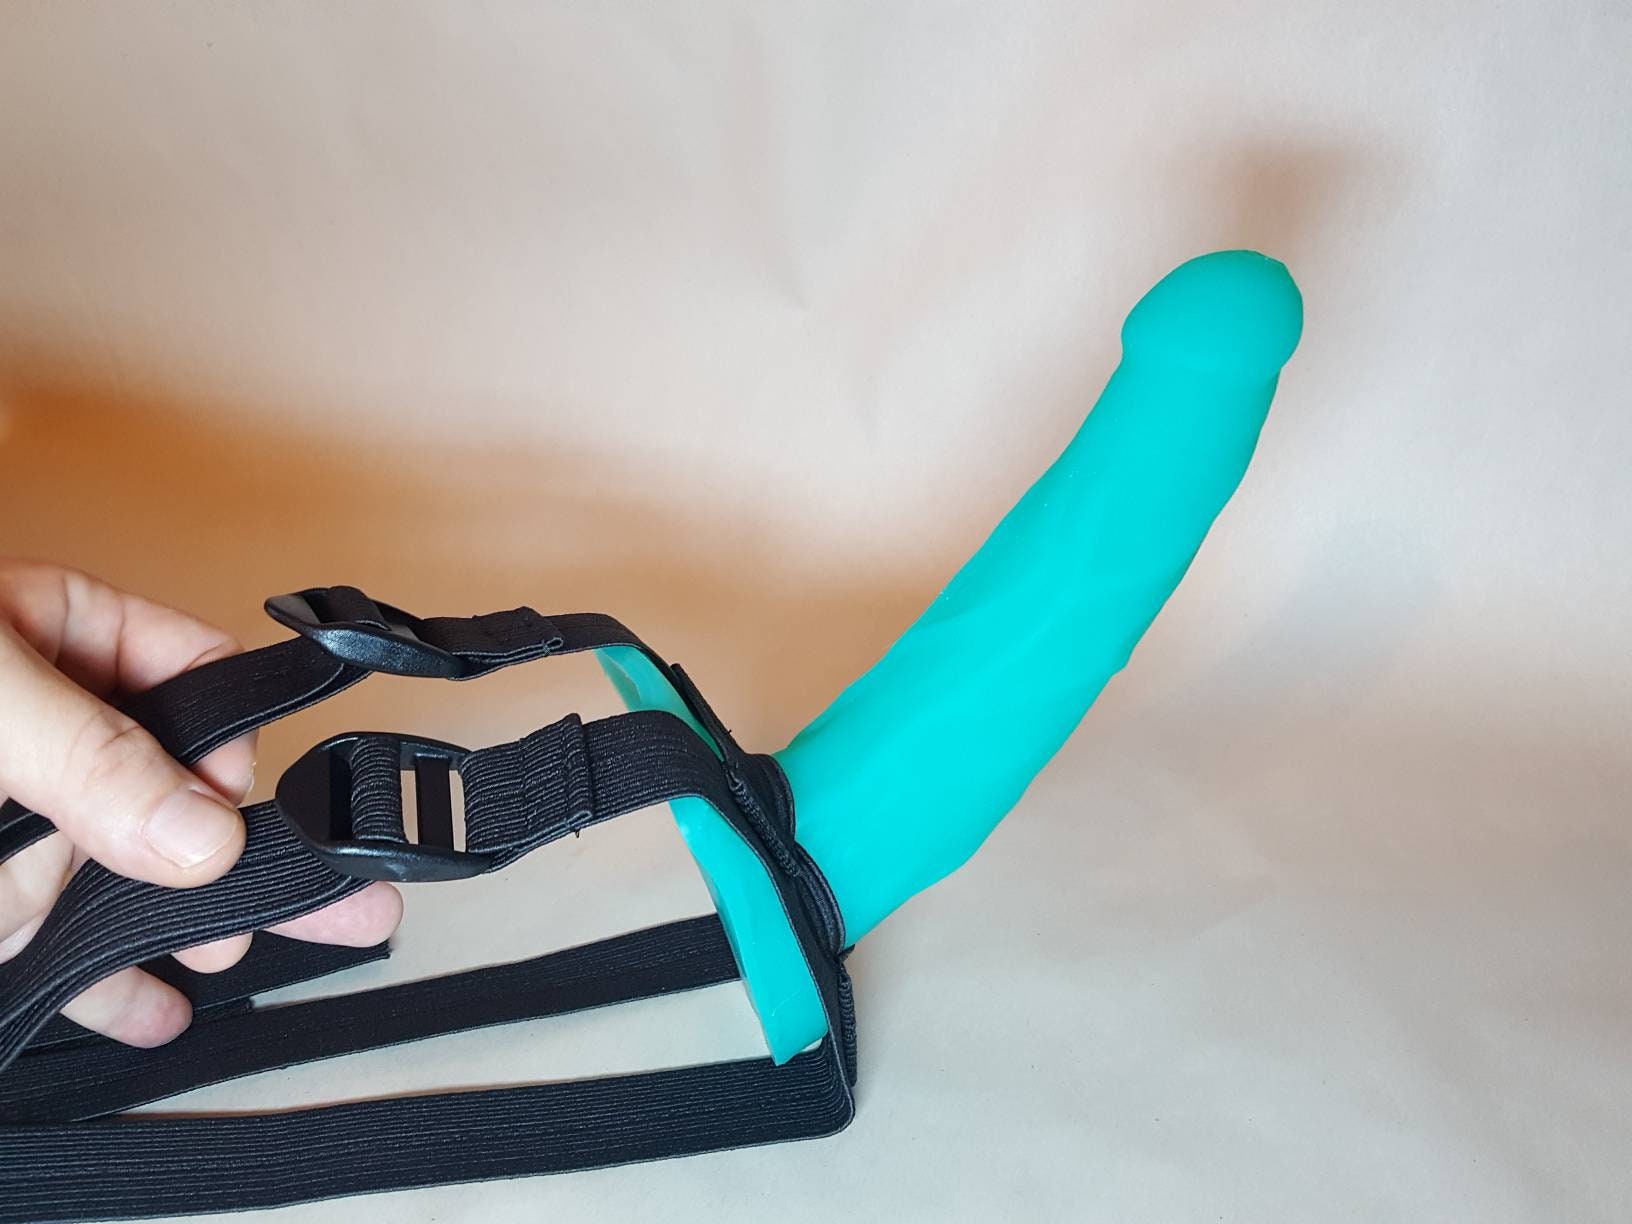 Adjustable Dildo HarnessWorks With The BJ DildoMature